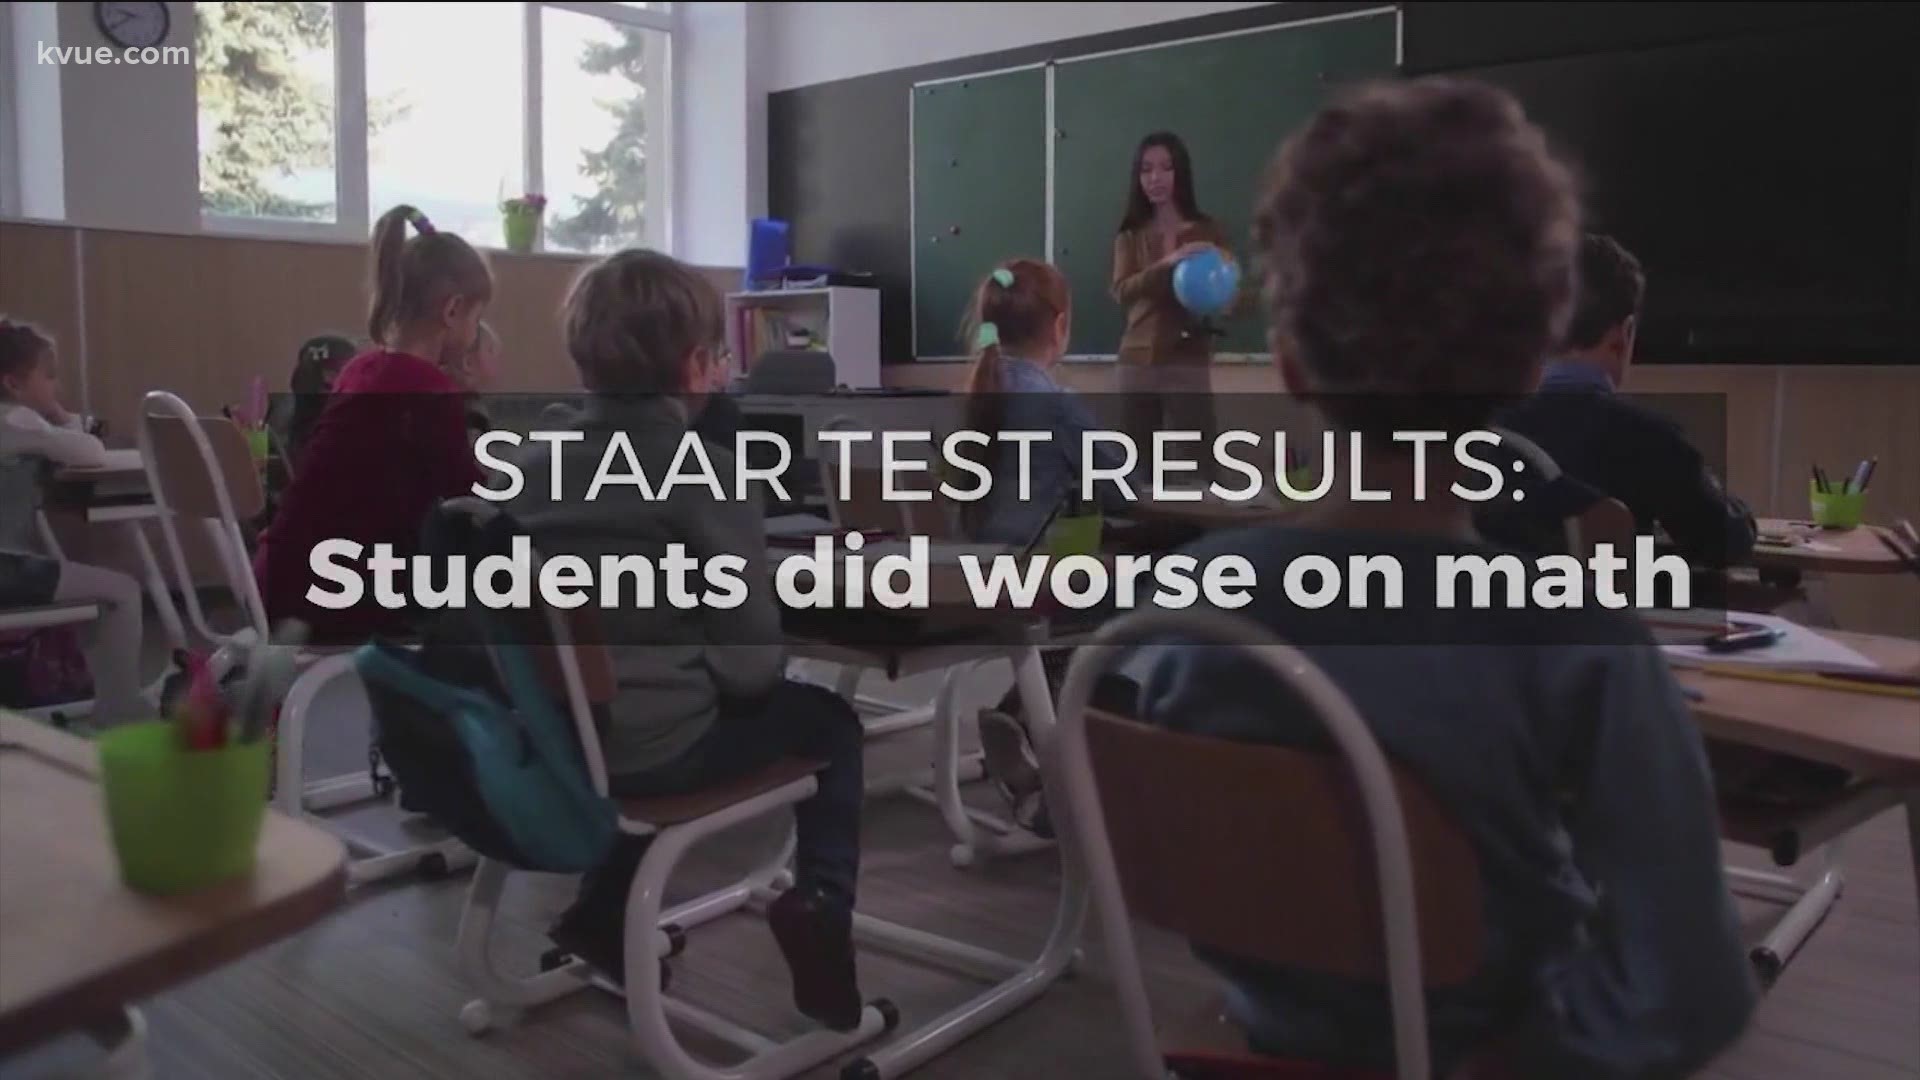 The COVID-19 pandemic's impact on last year's STAAR test results was apparent. Virtual learning meant scores dropped, compared to 2019.